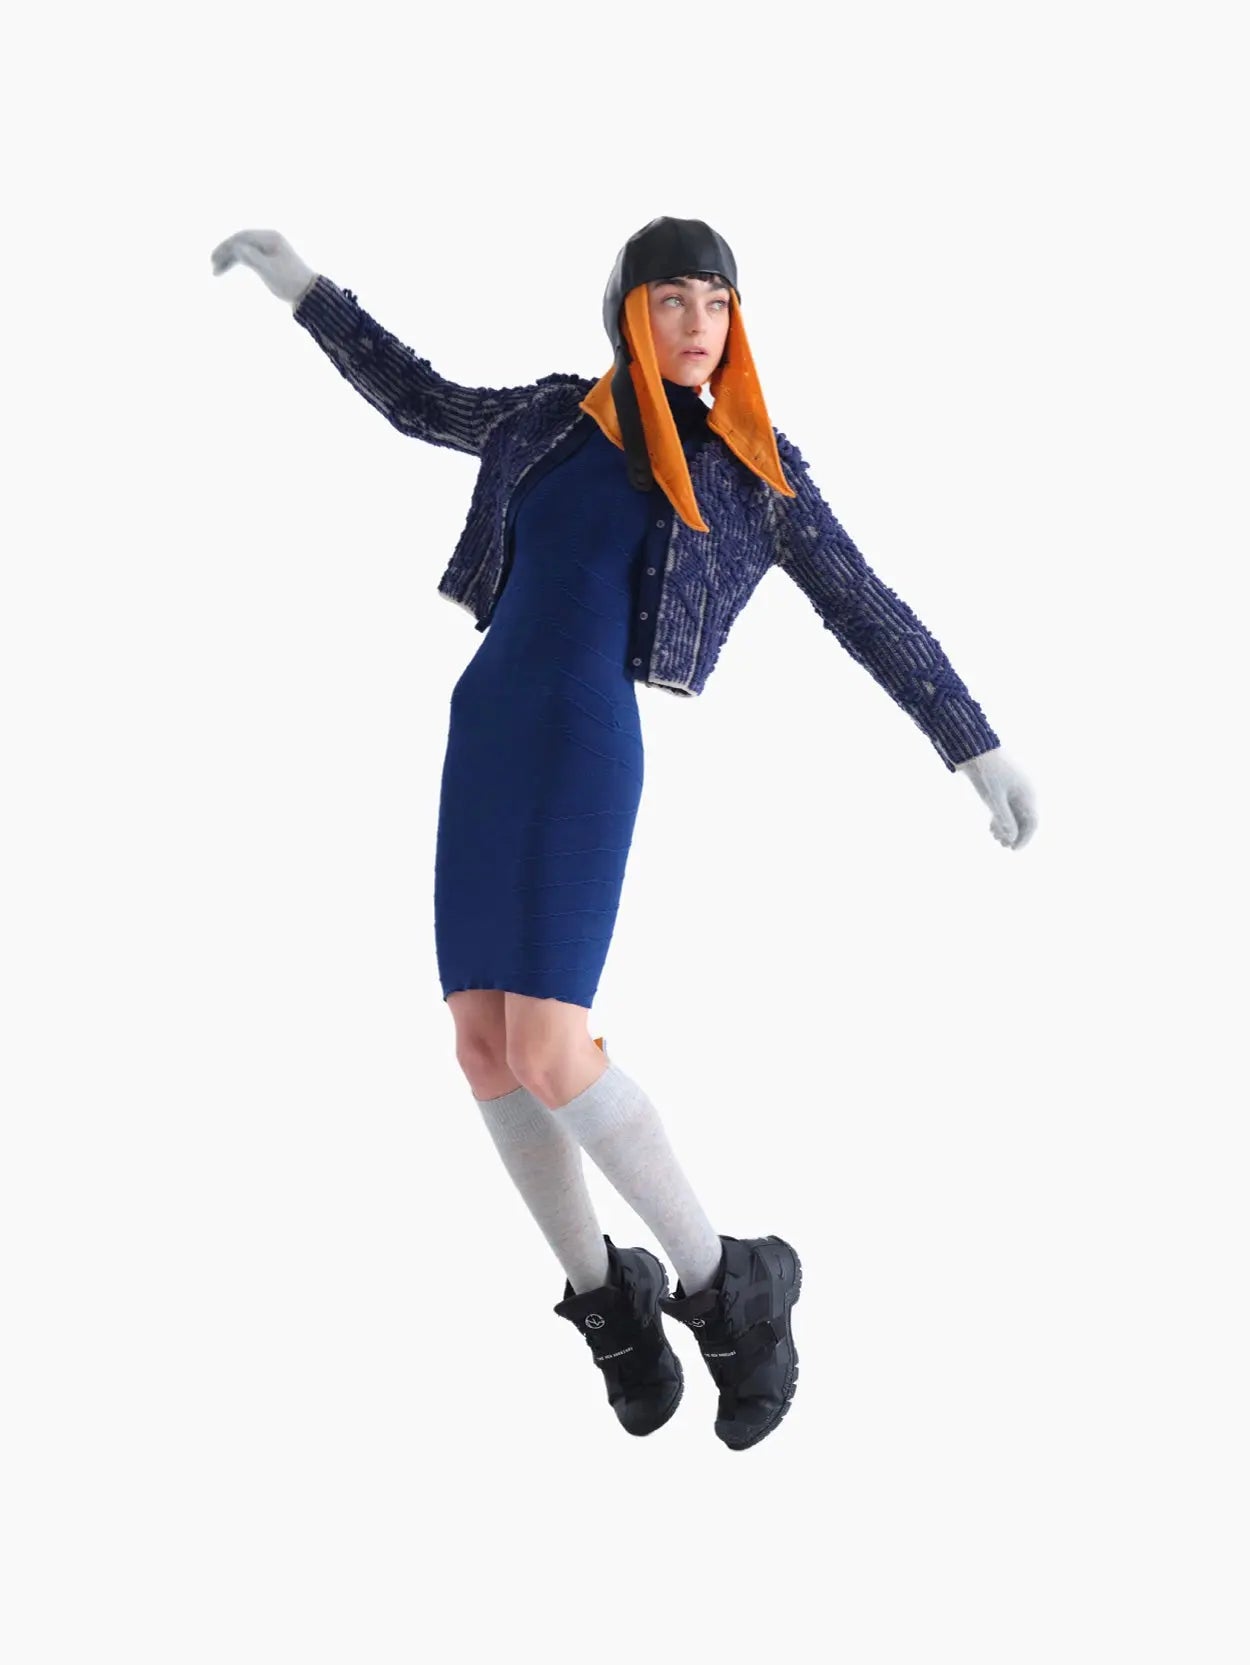 A person is standing against a white background wearing a blue textured jacket, a Rai Dress Navy by Bielo, gray gloves, gray knee-high socks, black boots, and a unique hat with orange ear flaps that cover the sides of their face. They are facing forward with a neutral expression, looking like they just stepped out of an exclusive Barcelona store.